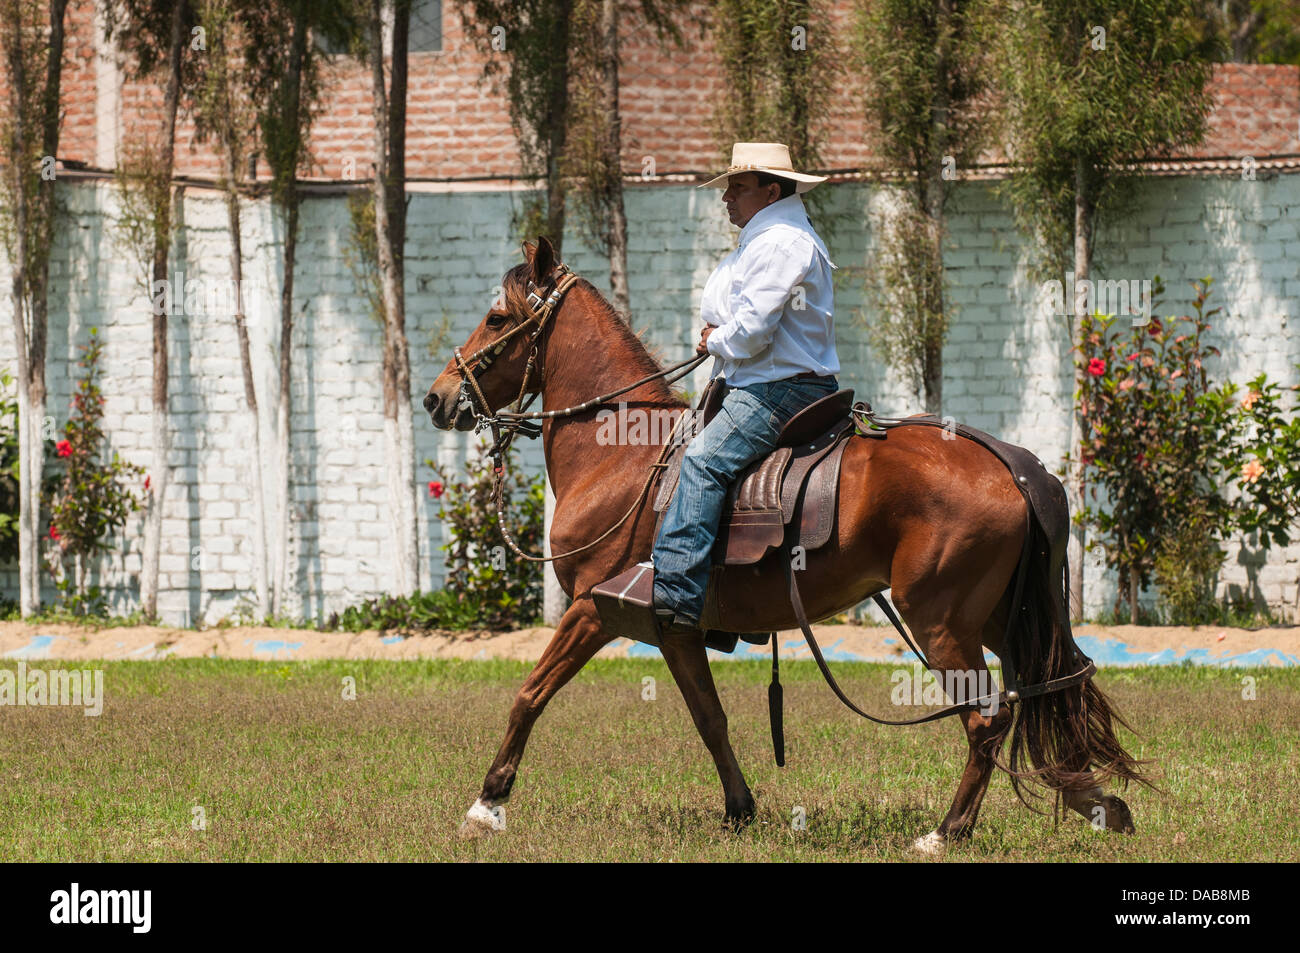 A horse and rider in field perform traditional horse moves called Peruvian Paso a type of equestrian dressage, Trujillo, Peru. Stock Photo